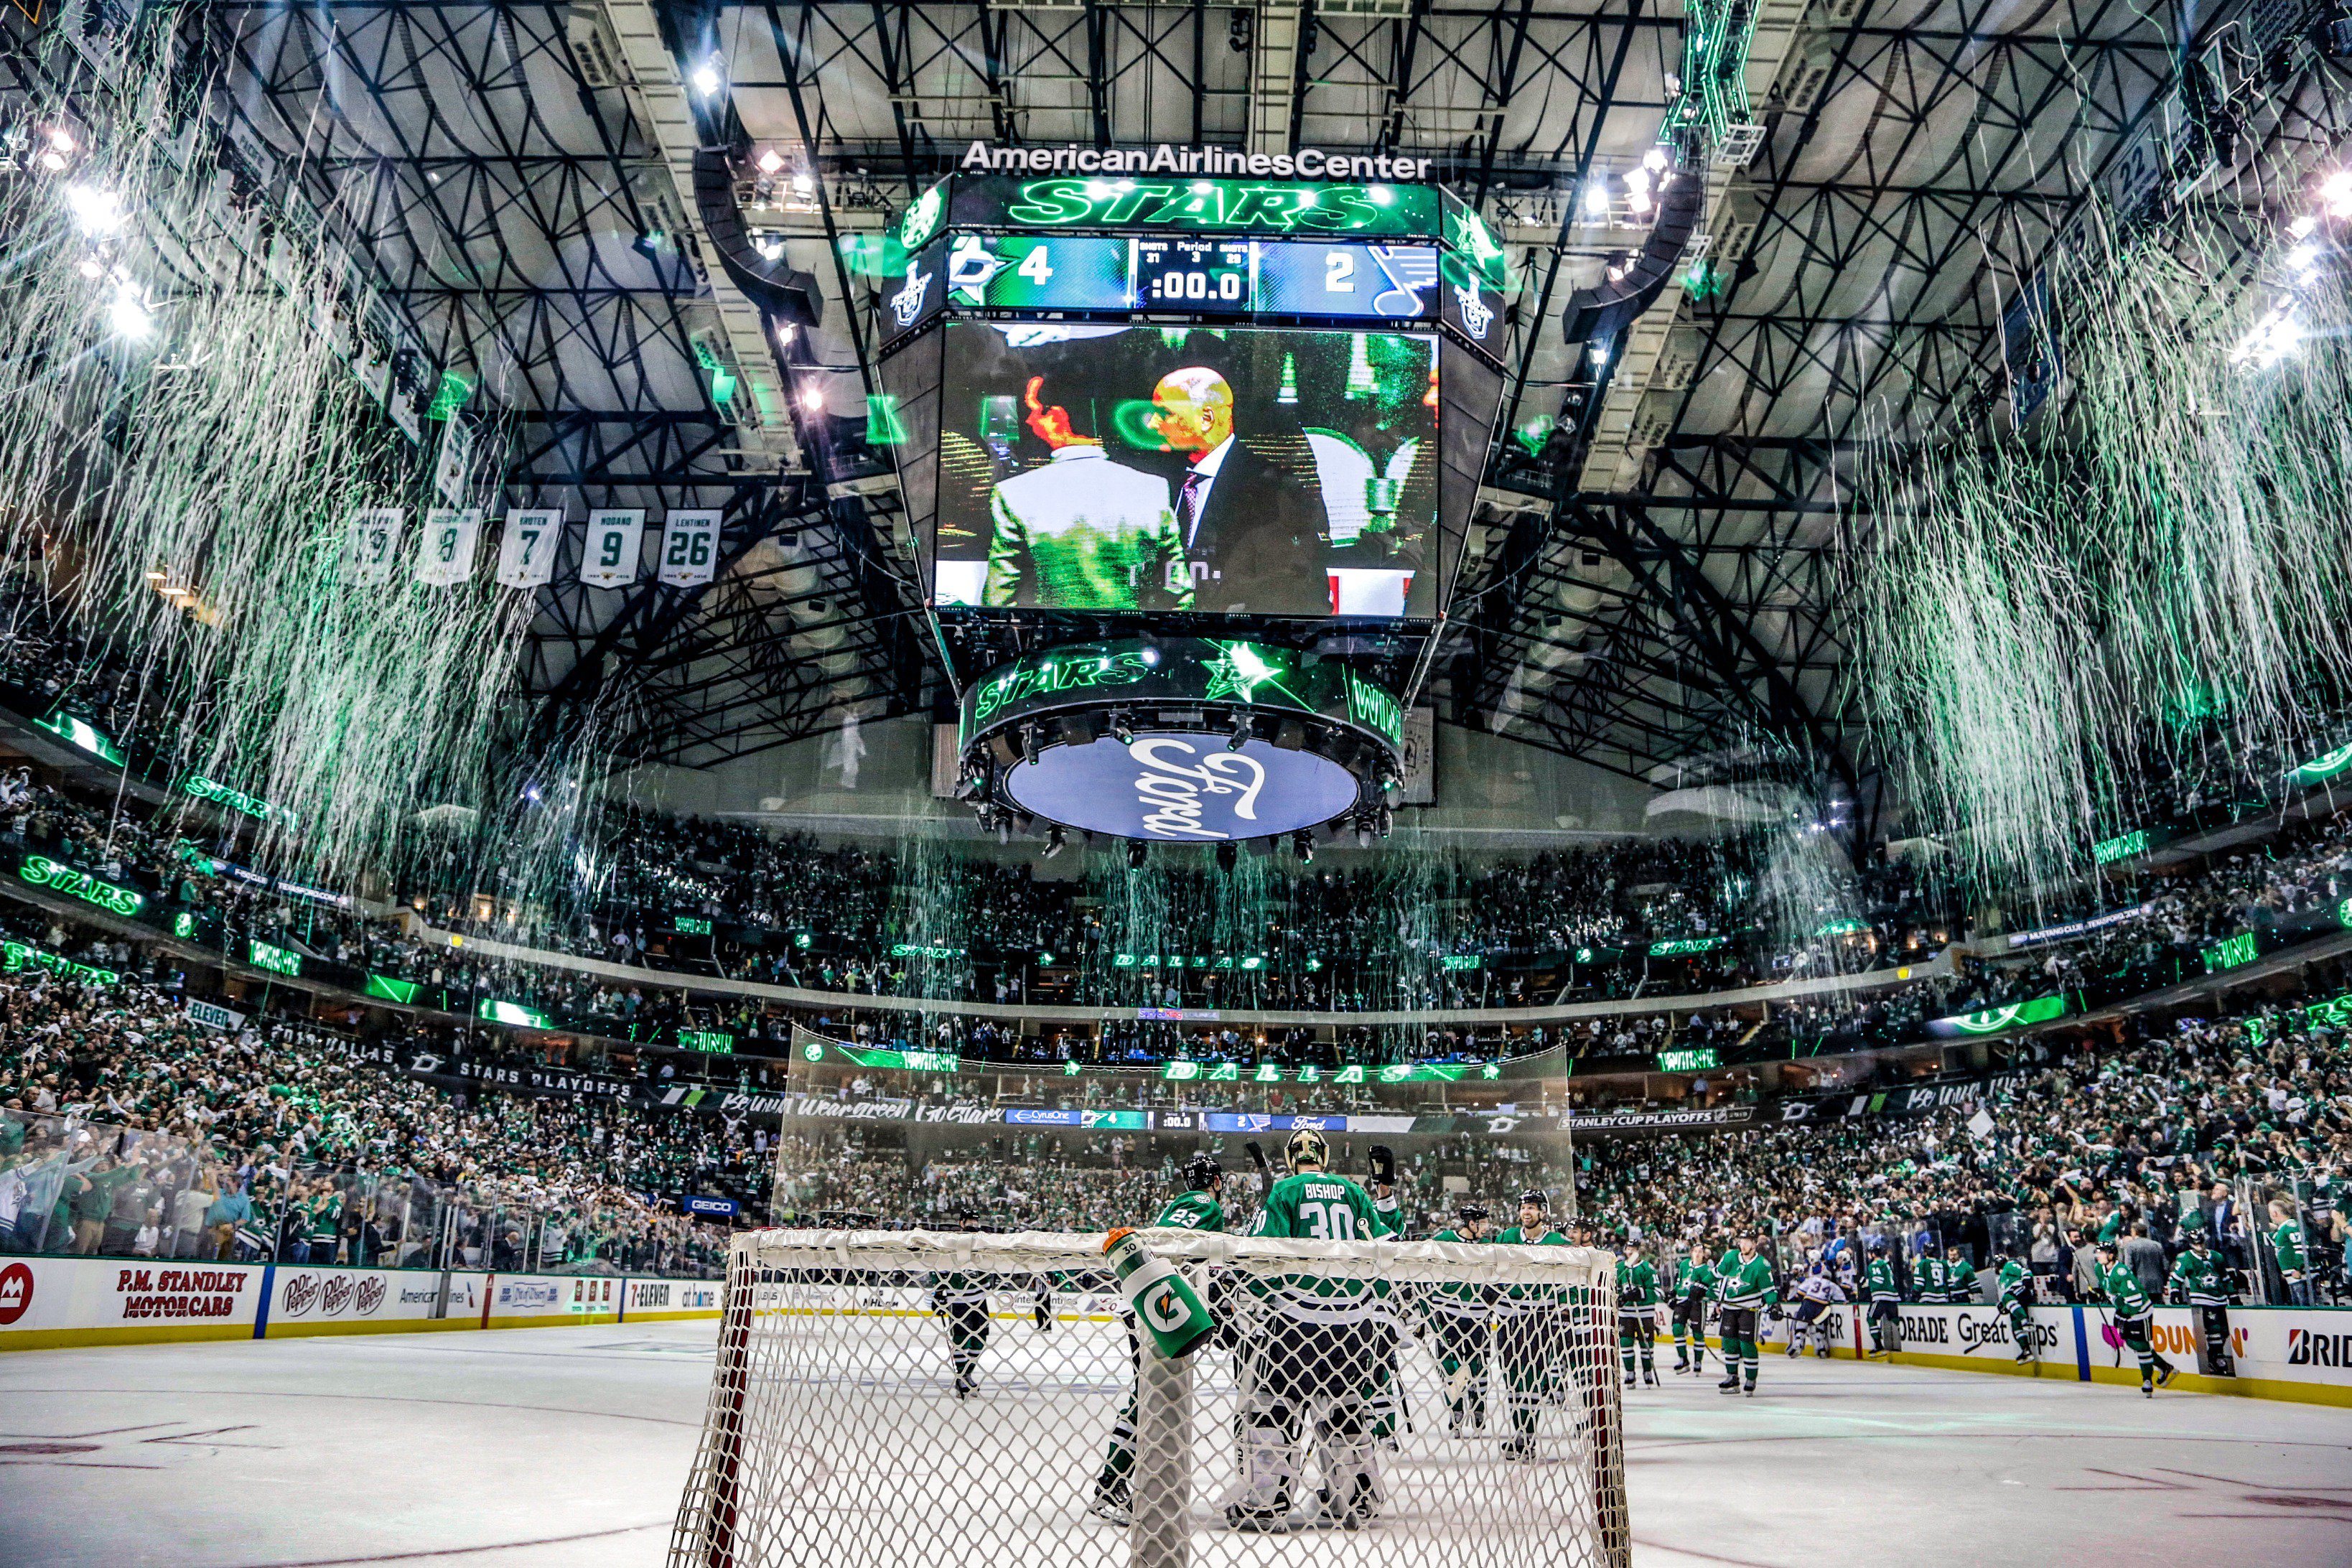 Dallas Stars - AAC was on another level last night.